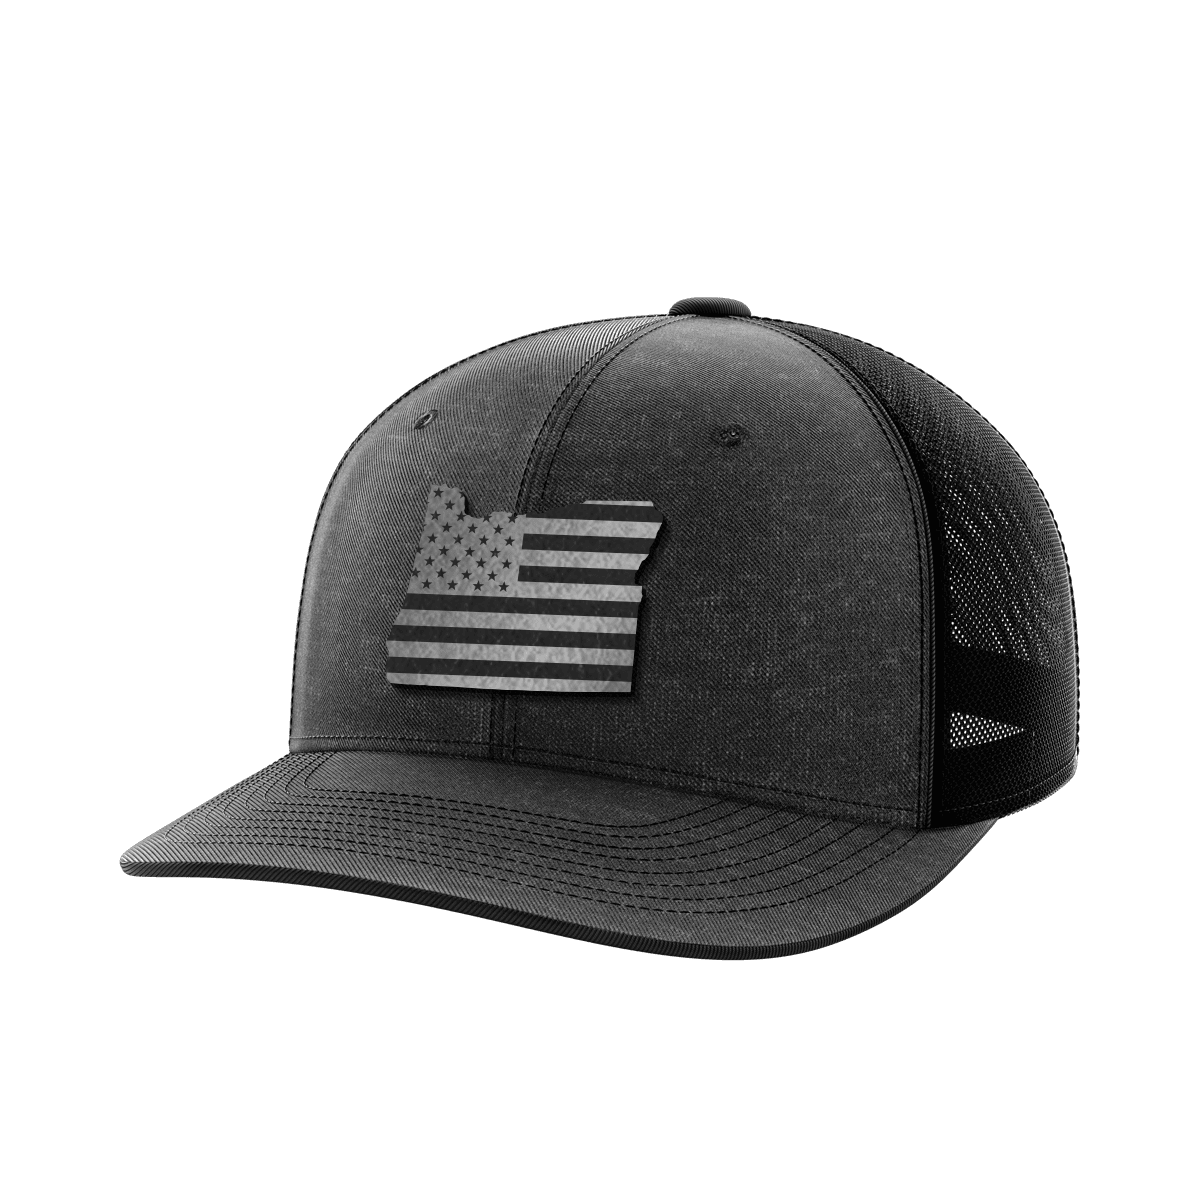 Oregon United Collection (black leather) - Greater Half